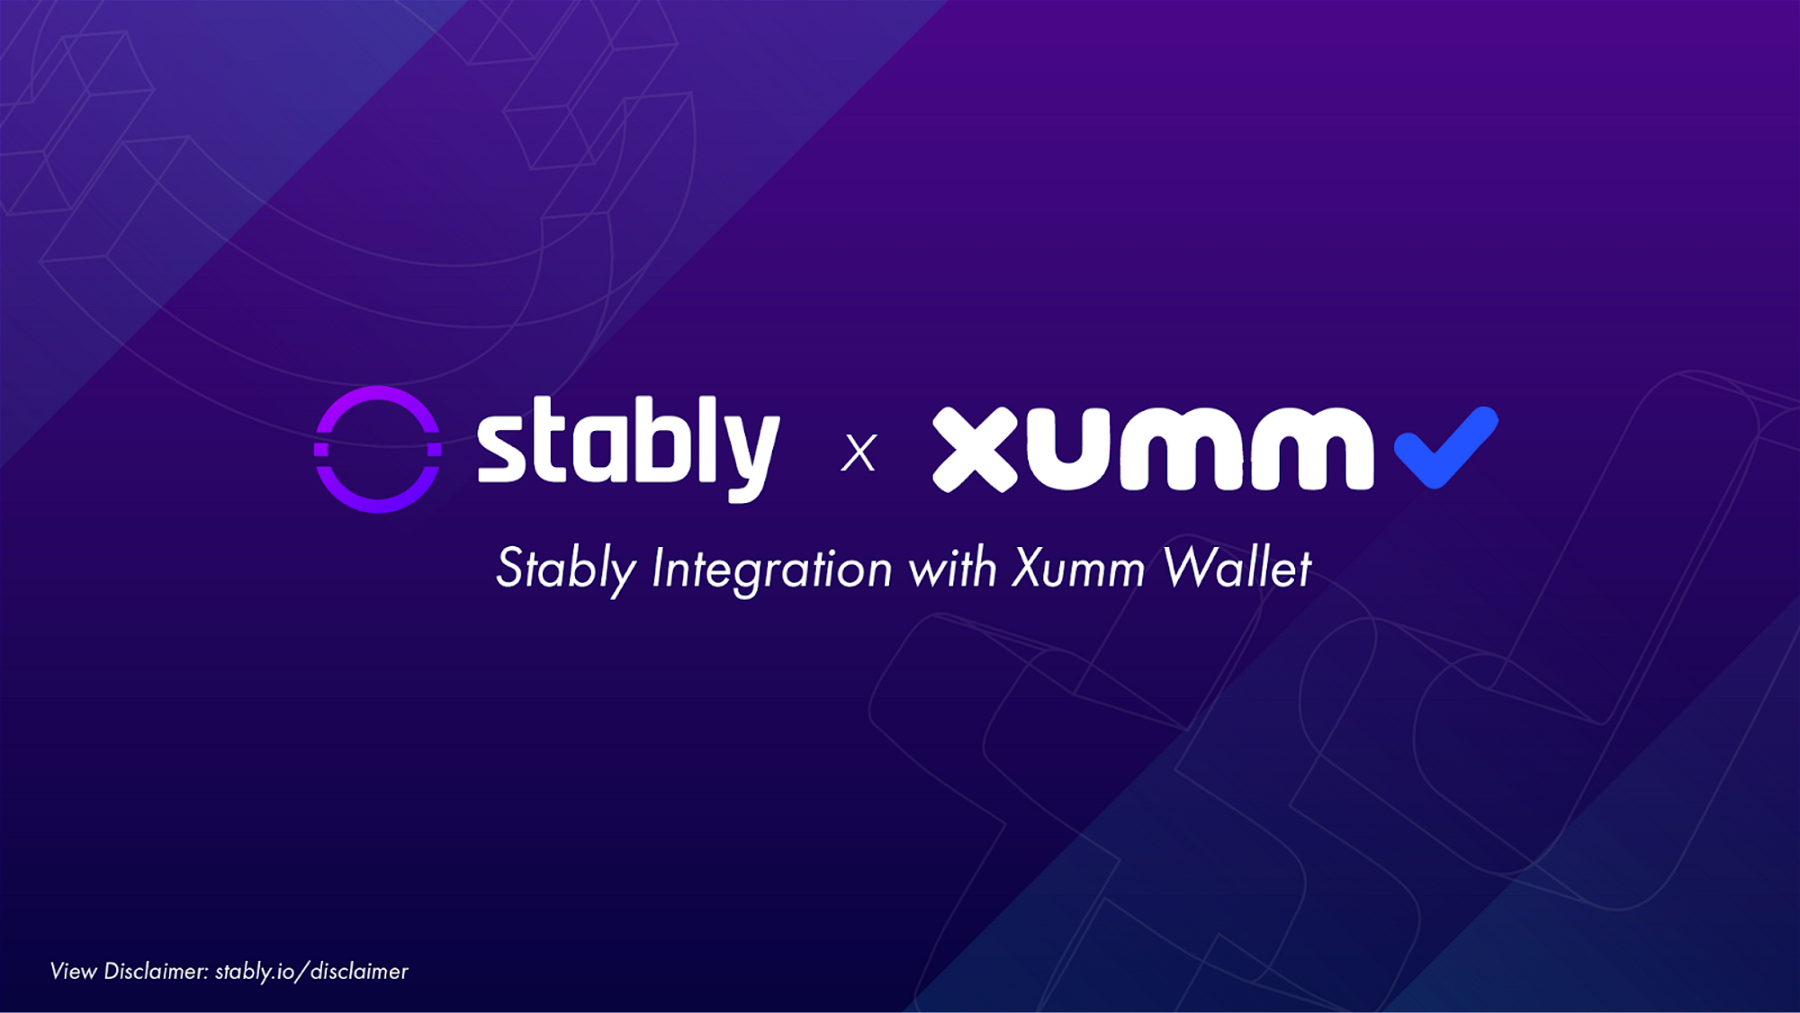 Xumm has partnered with Stably to bring a new On/Off-Ramp to our US user base.